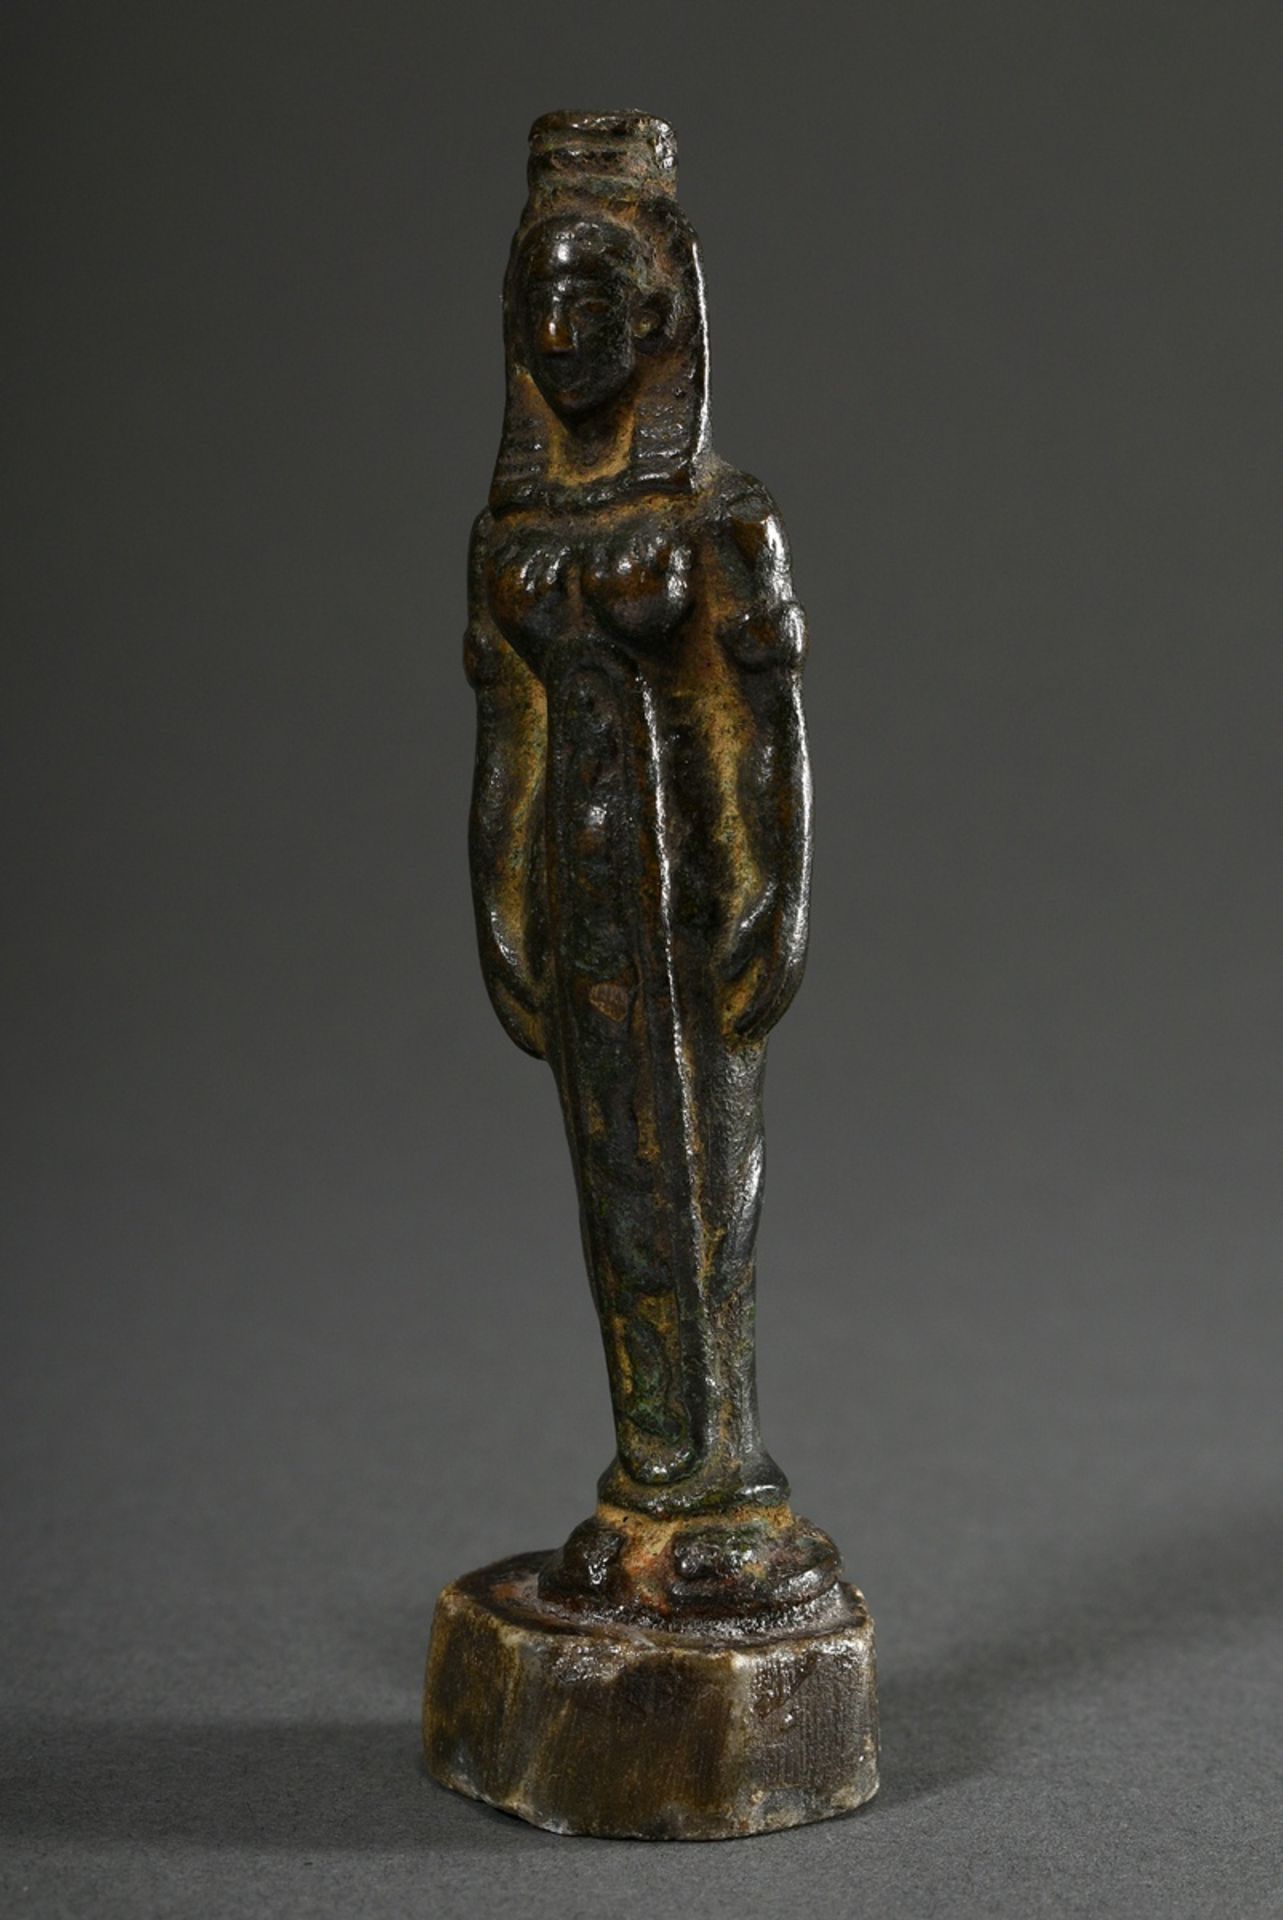 Small statuette "Female Egyptian deity", bronze with greenish patina, mounted/glued on marble base, - Image 2 of 6